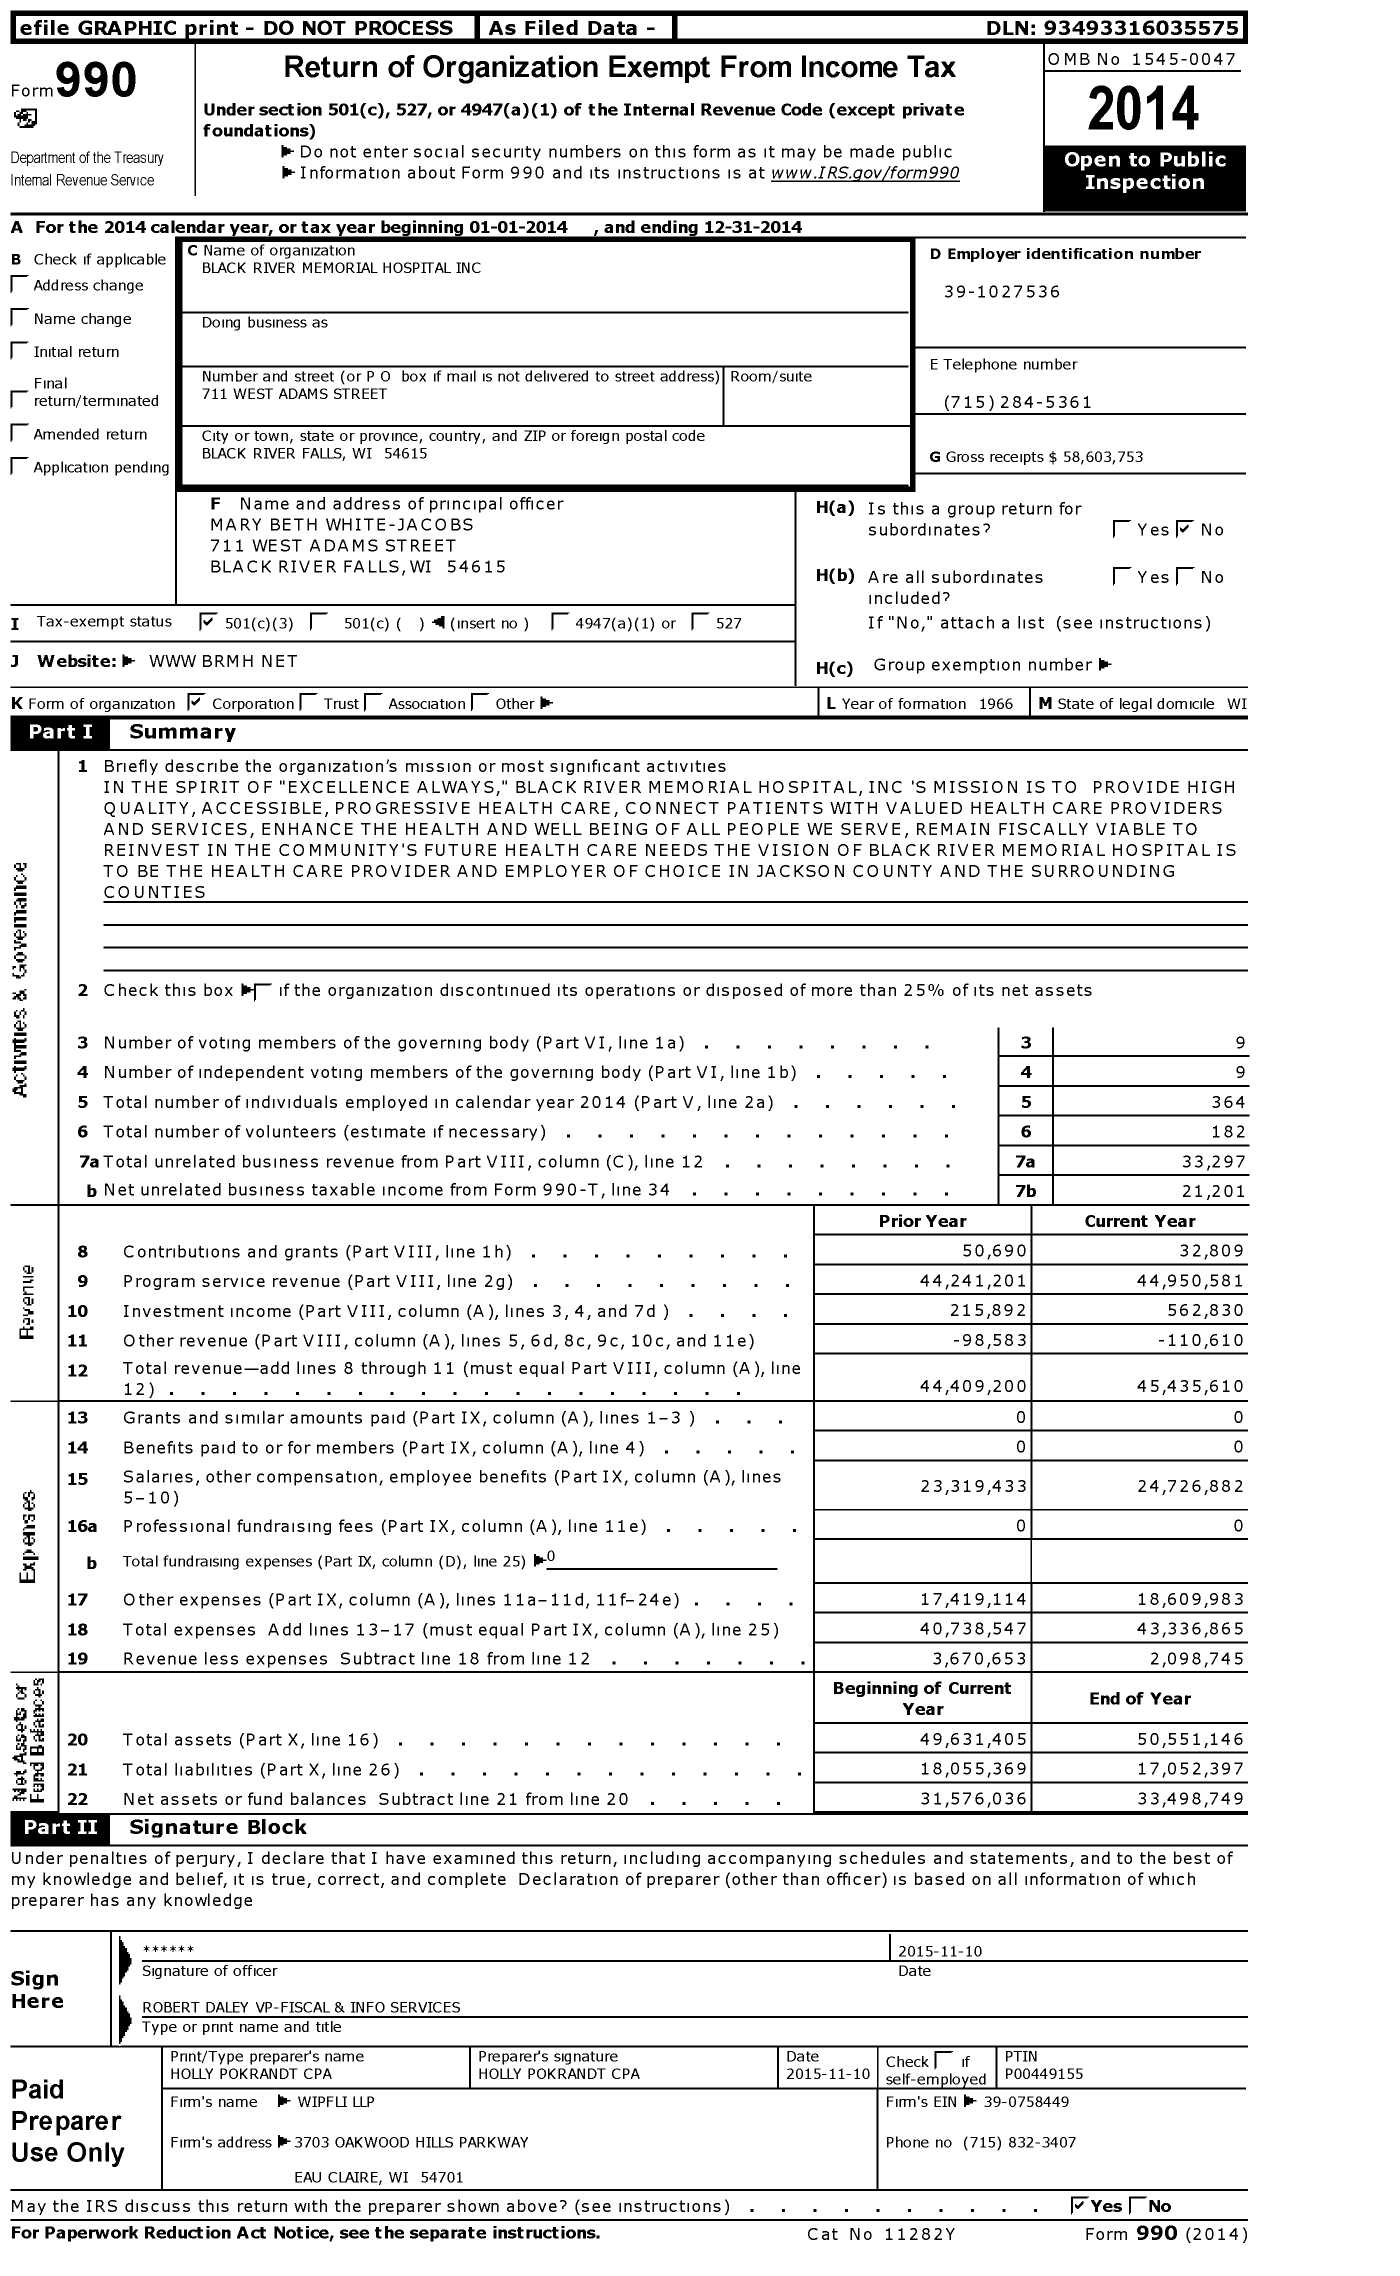 Image of first page of 2014 Form 990 for Black River Memorial Hospital (BRMH)